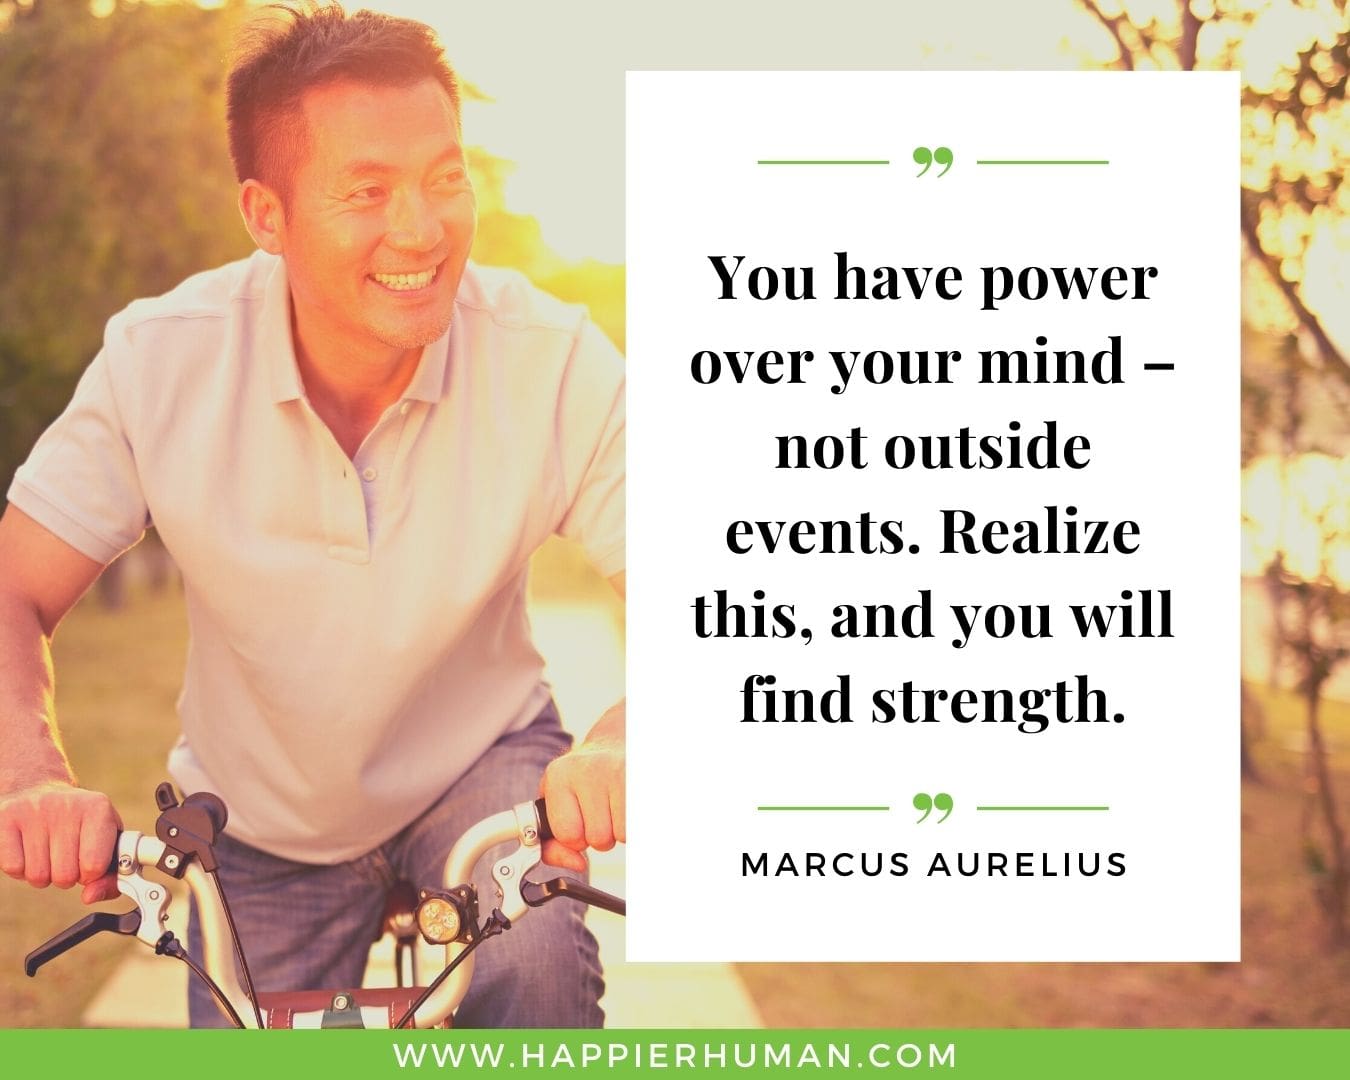 Positive Energy Quotes - “You have power over your mind – not outside events. Realize this, and you will find strength.” - Marcus Aurelius